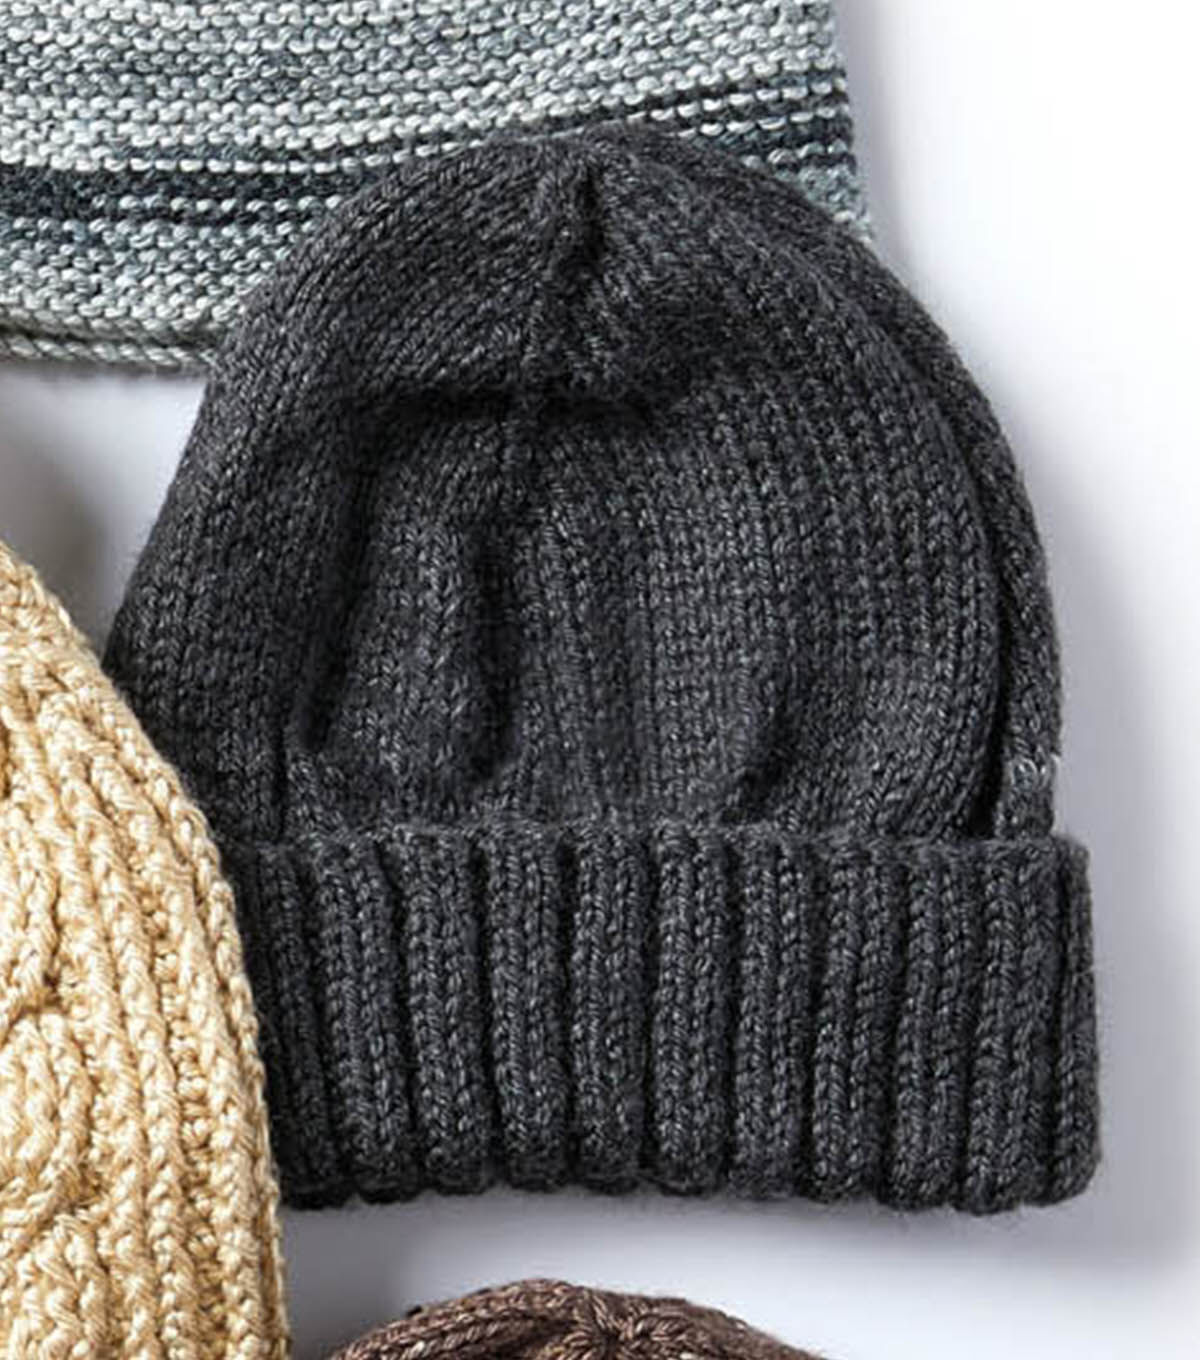 How To Make Knit A Men's Basic Hat And Scarf Set Online | JOANN